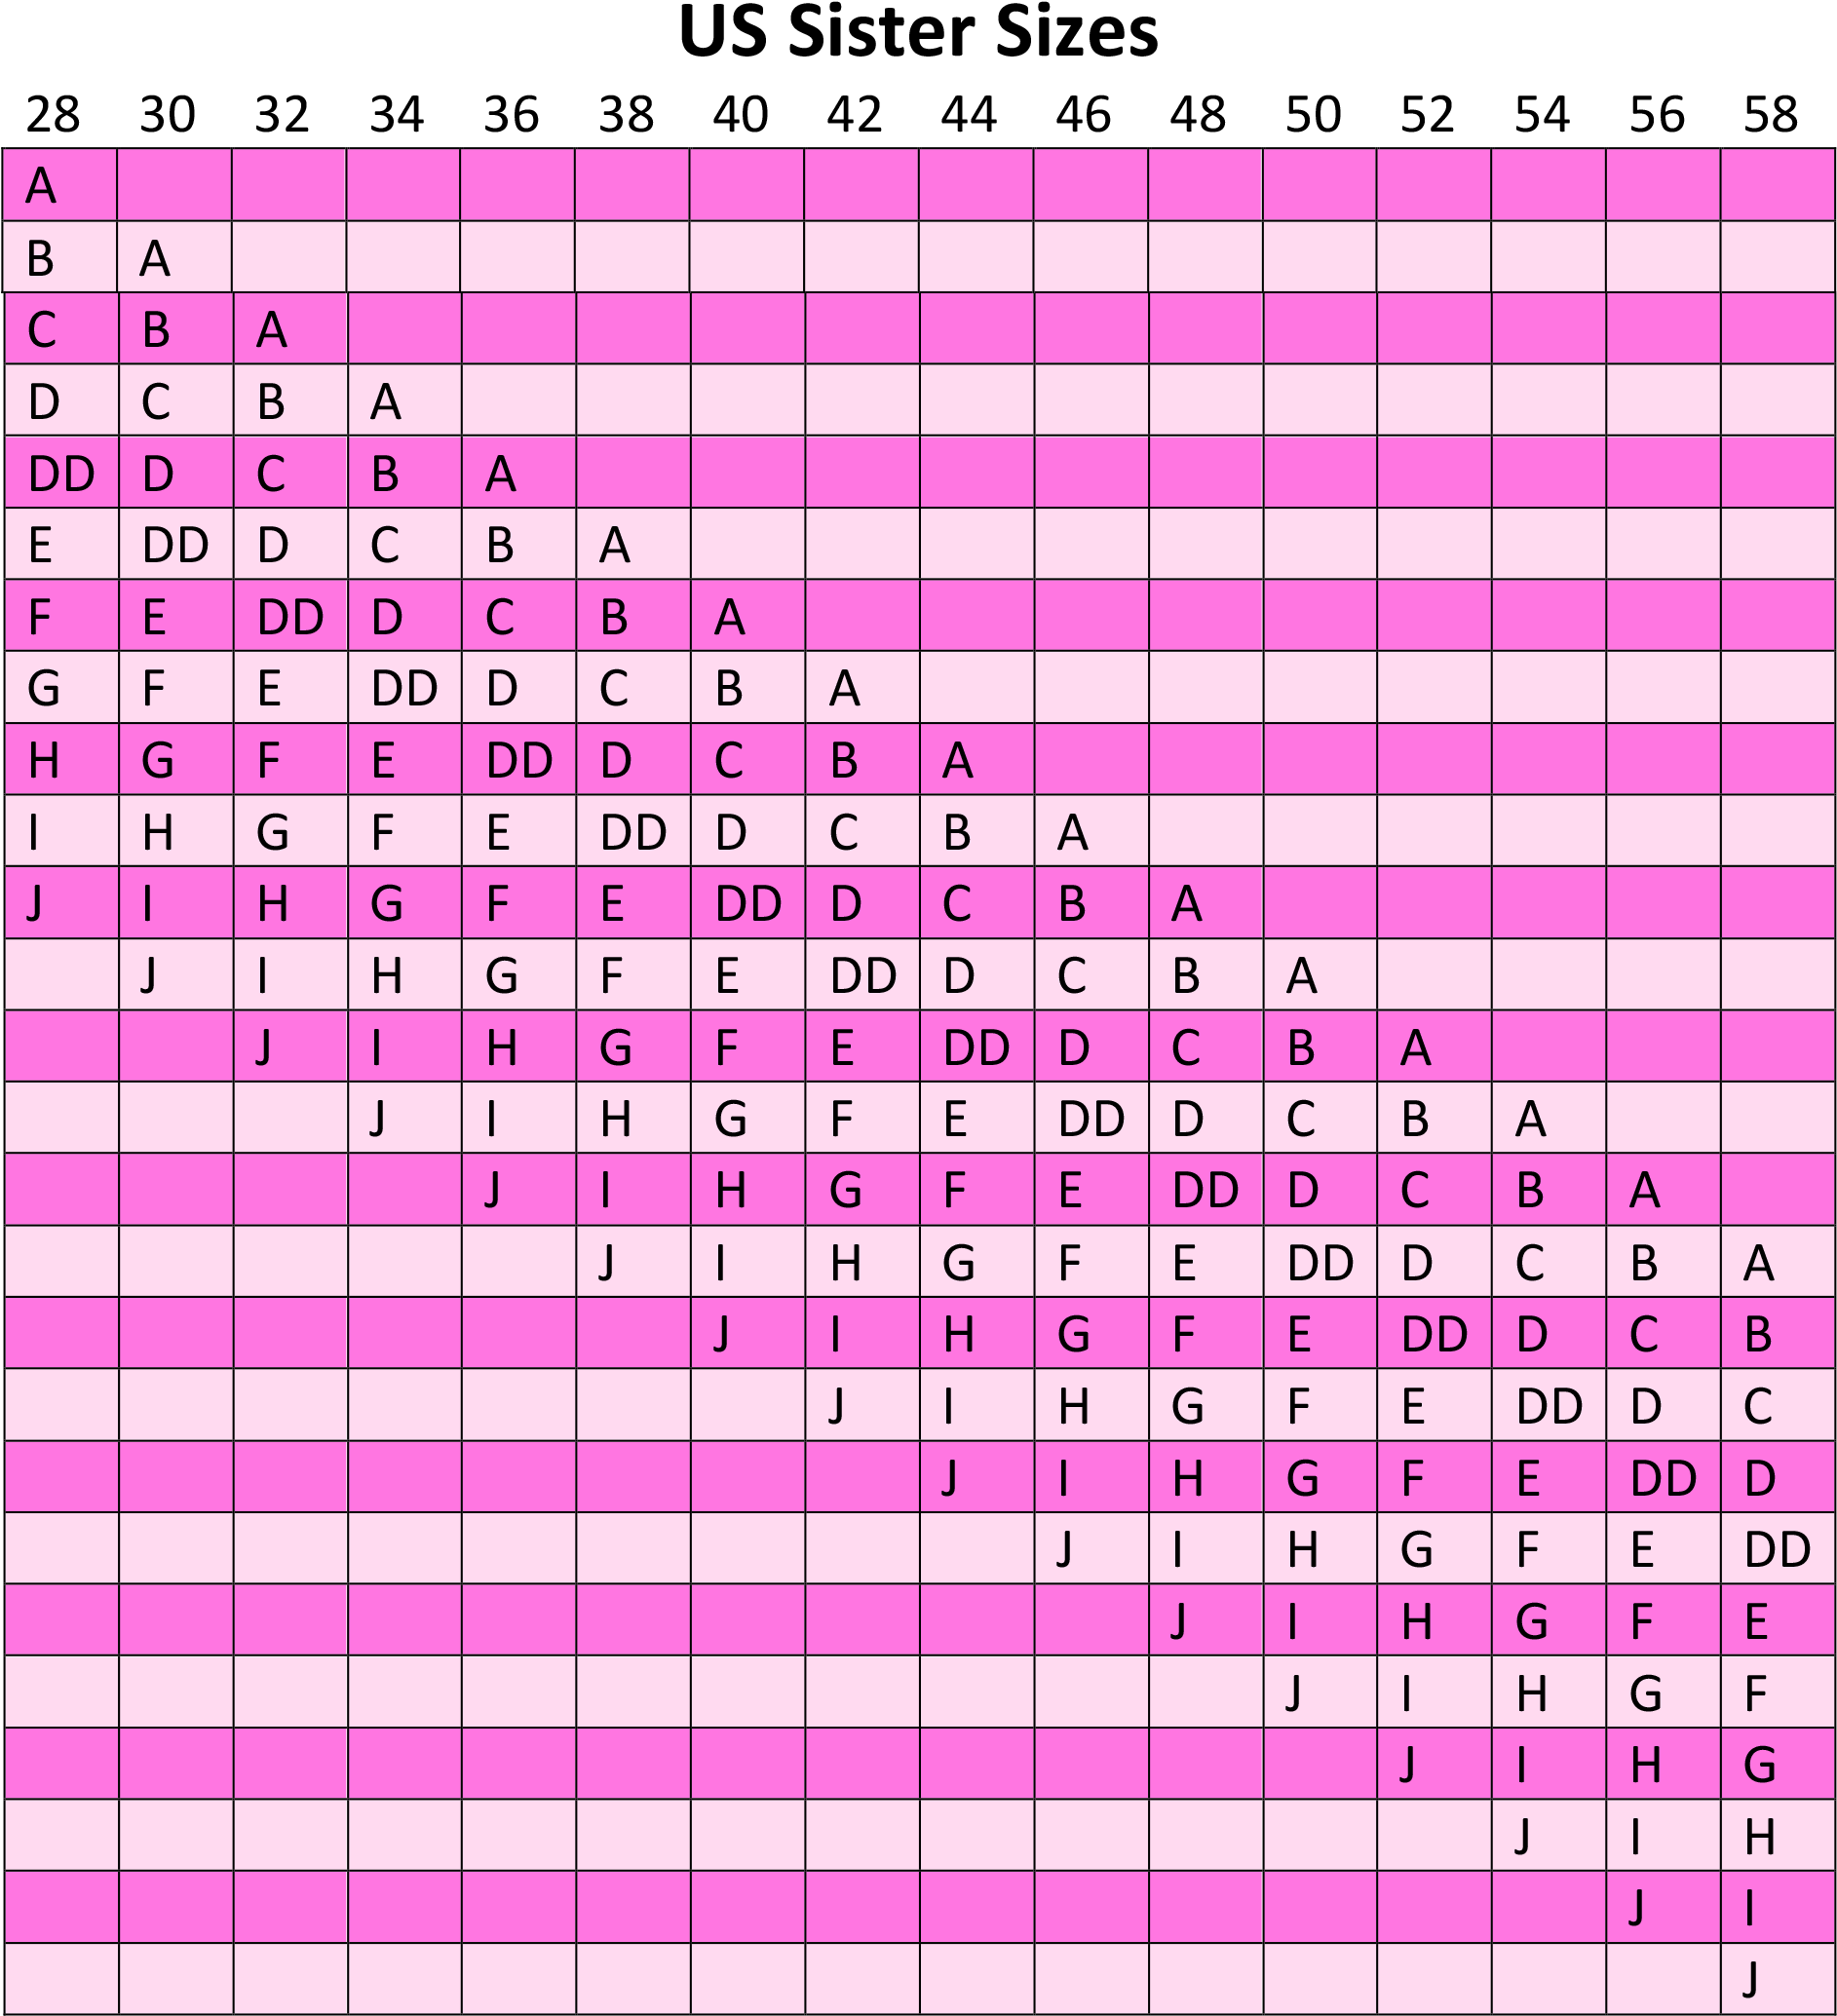 Download 229 X - Bra Sister Size Chart Us PNG Image with No Background 